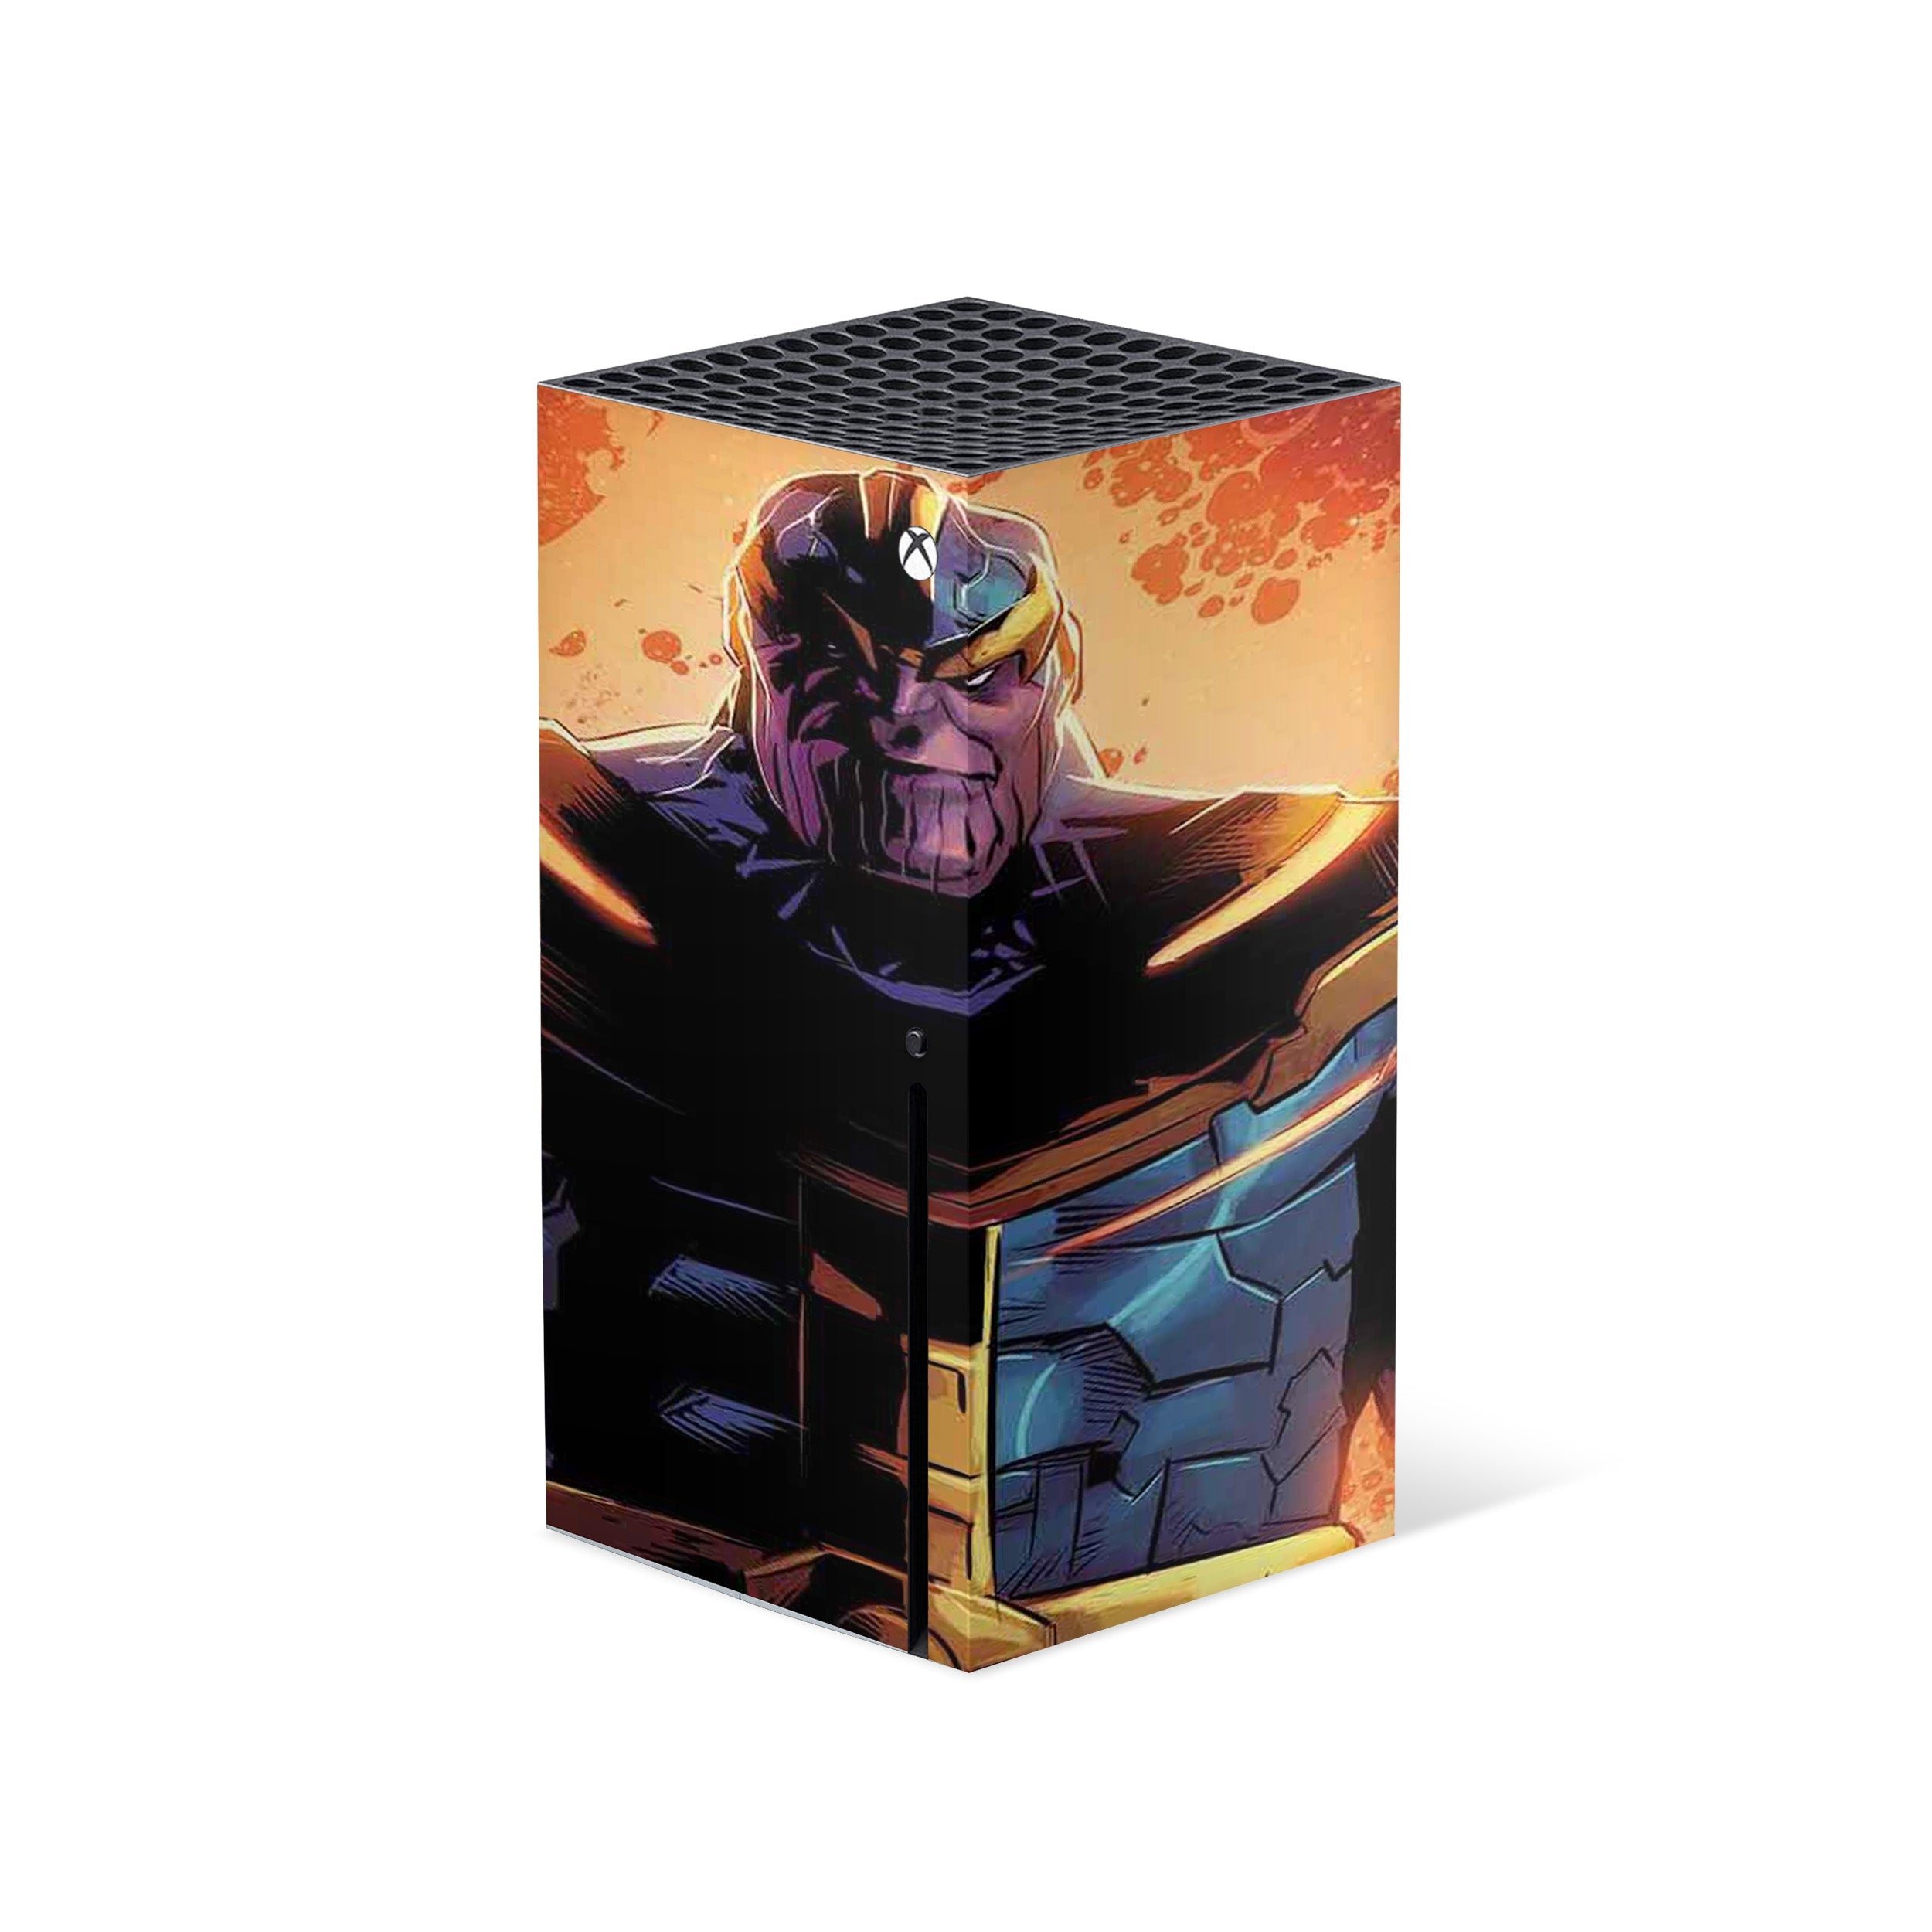 A video game skin featuring a Marvel Thanos design for the Xbox Series X.